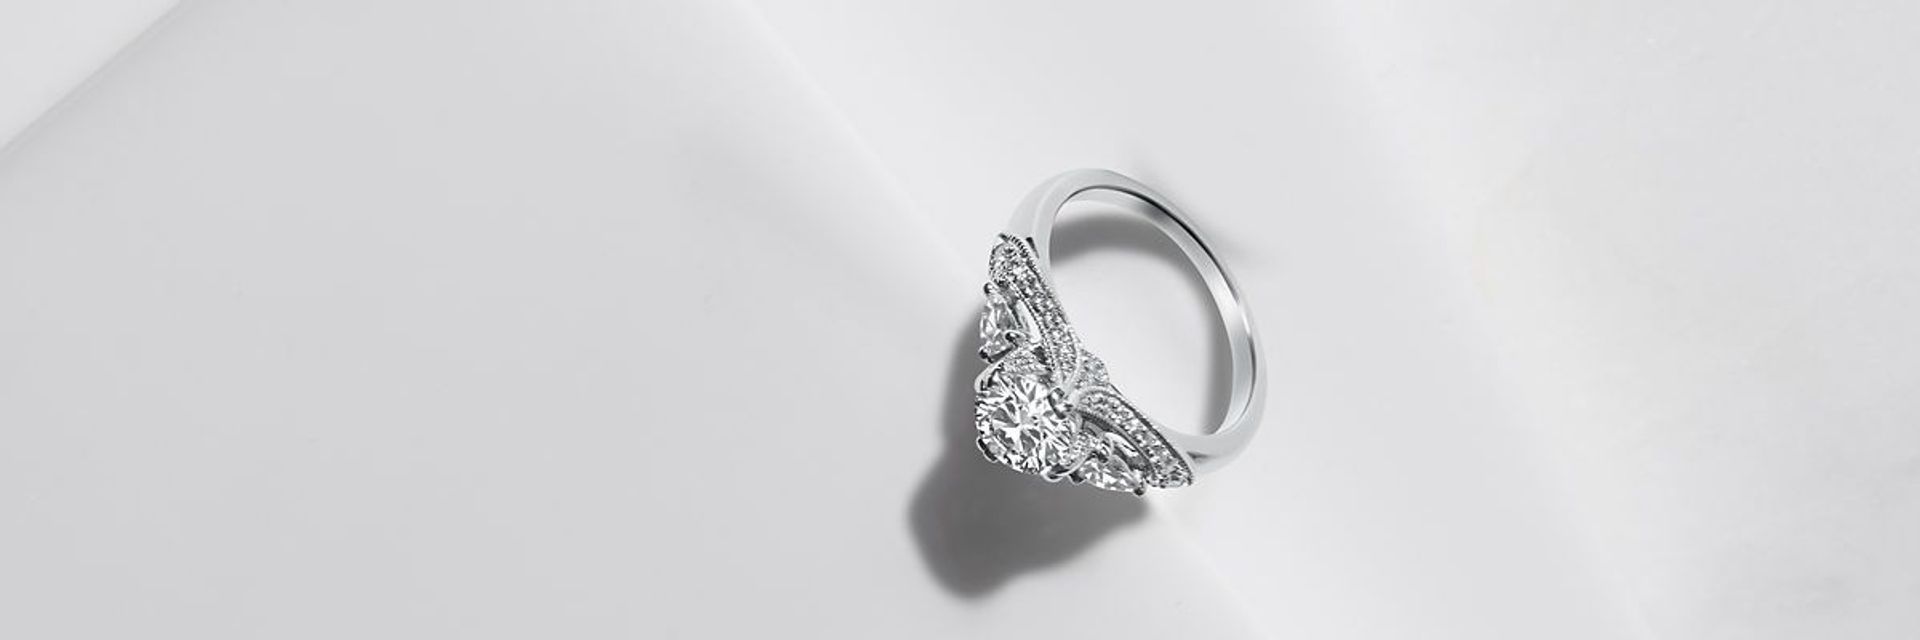 ZAC Zac Posen deco-inspired 14k white gold engagement ring featuring a round center diamond and 2 pear-shaped side stones.